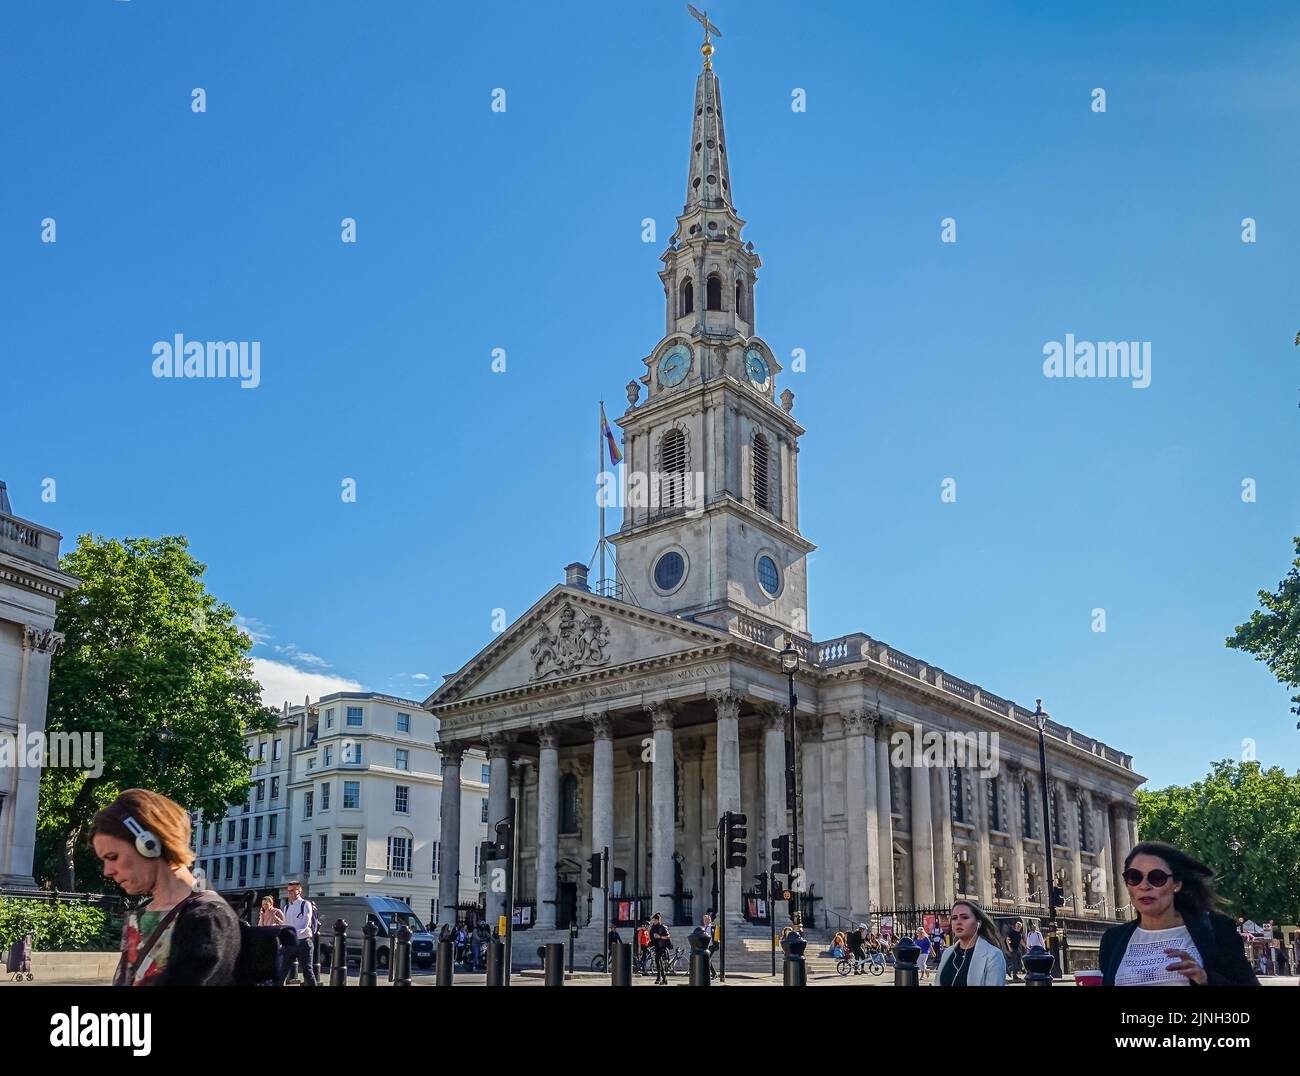 London, UK- July 4, 2022: Trafalgar Square. Entire St. Martin-in-the-fields church against blue sky, Street scene with people, cars, and traffic line. Stock Photo